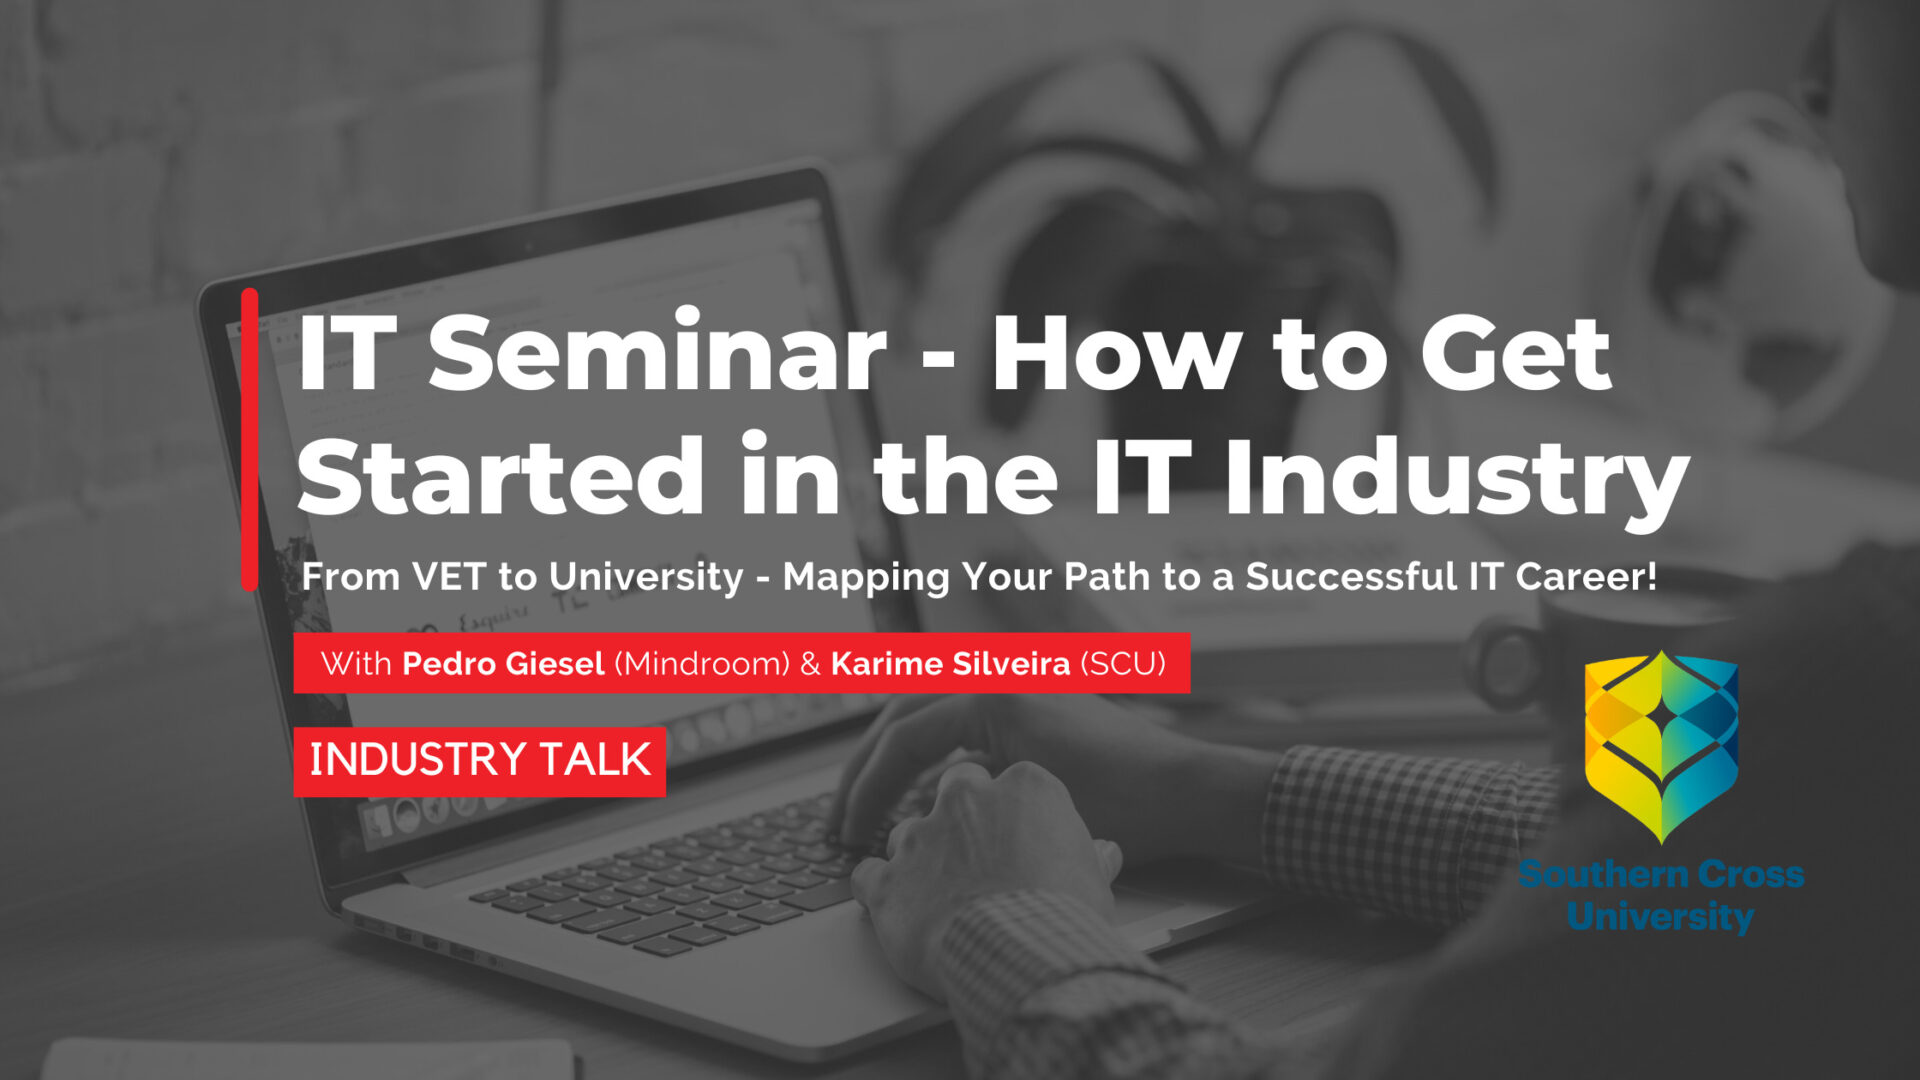 Watch This Video to Kickstart Your Journey in the IT Industry